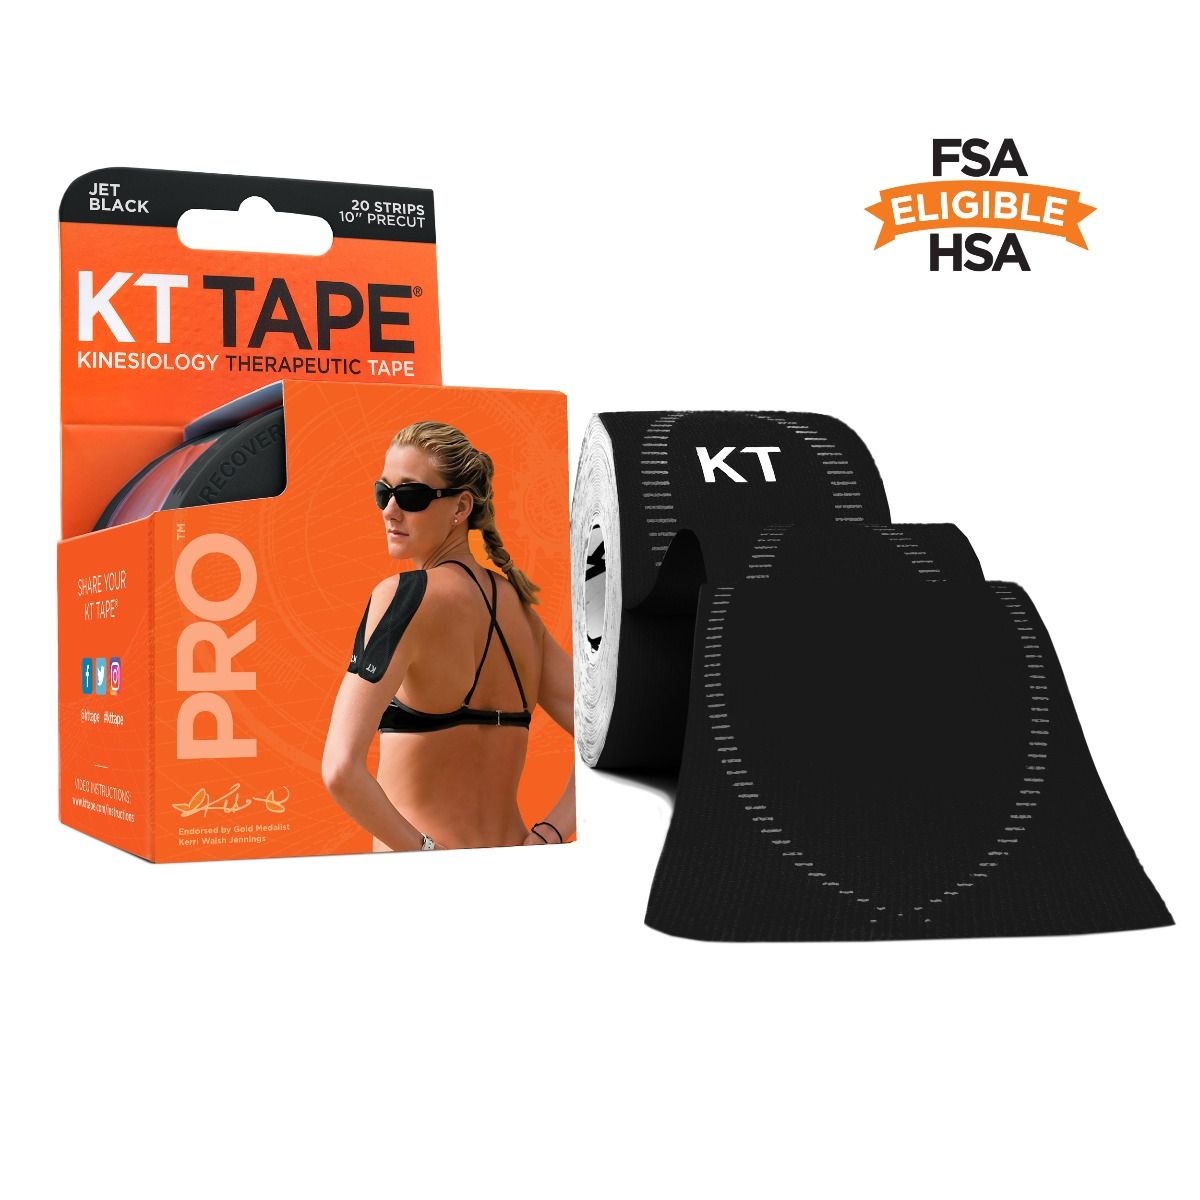 KT Tape PRO (Kinesiology Therapeutic Tape)